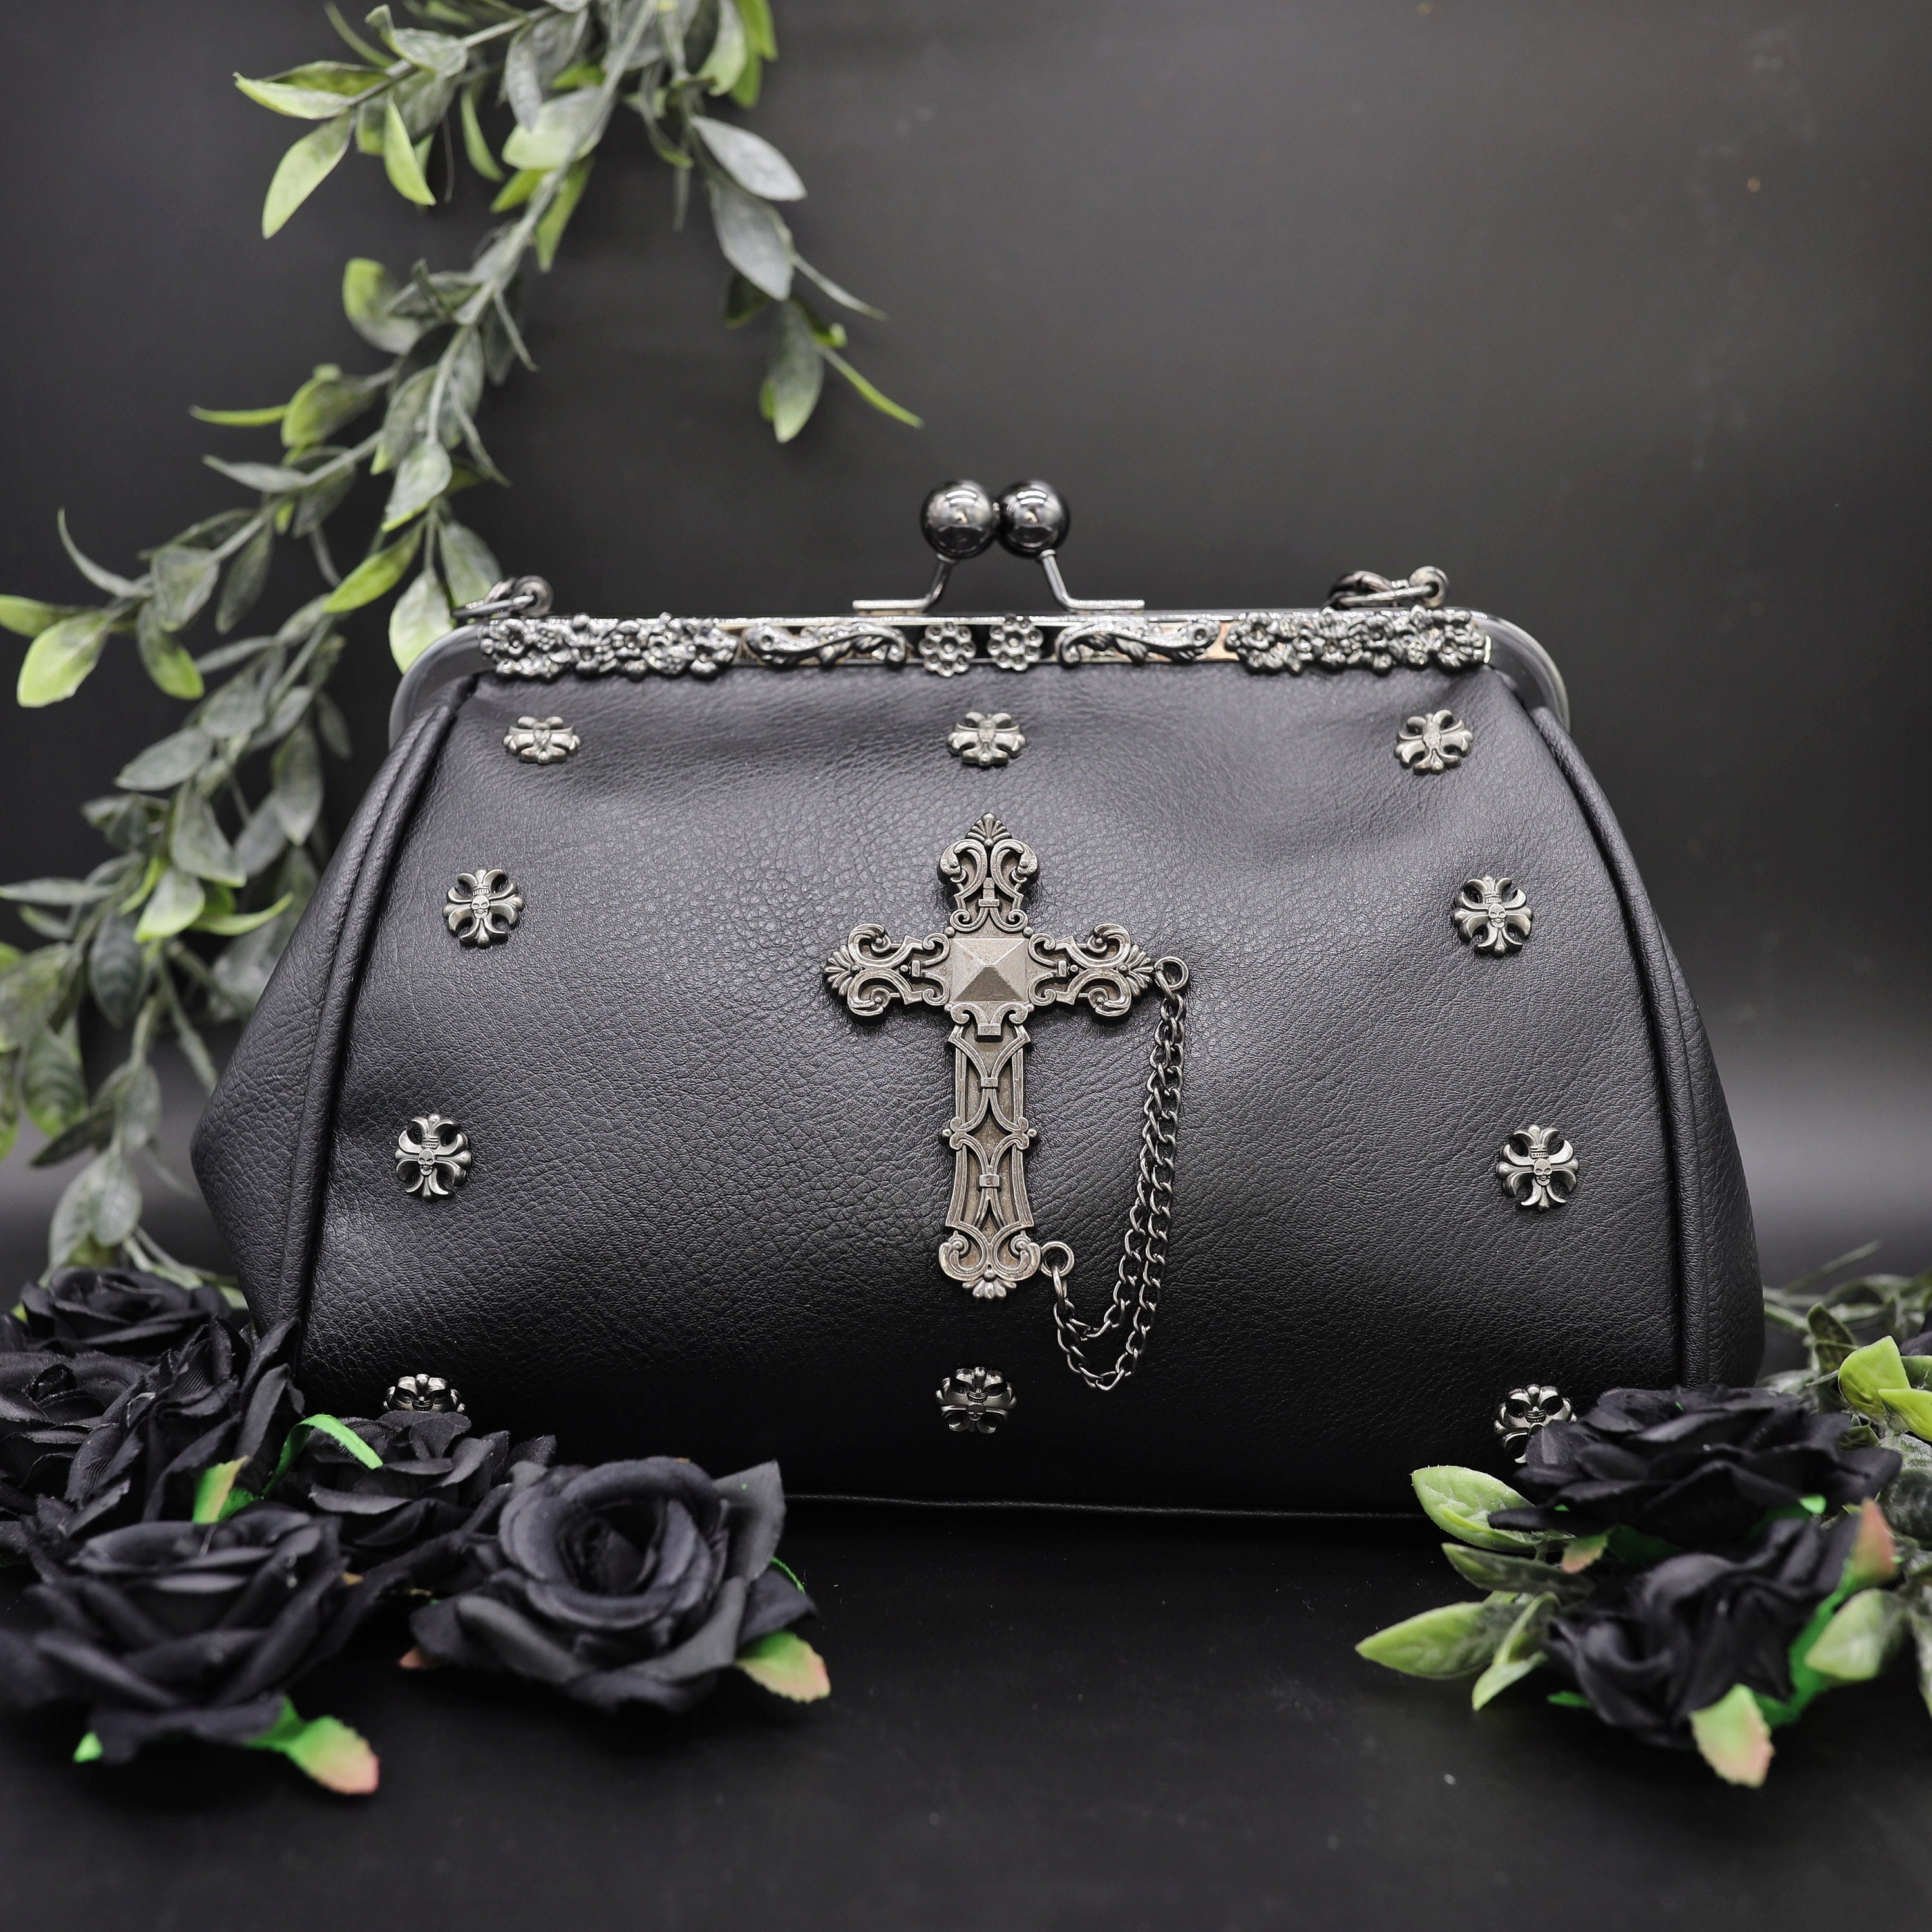 Victorian Gothic Motif Inspired Messenger Bag · VINTAGE GALERIA · Online  Store Powered by Storenvy